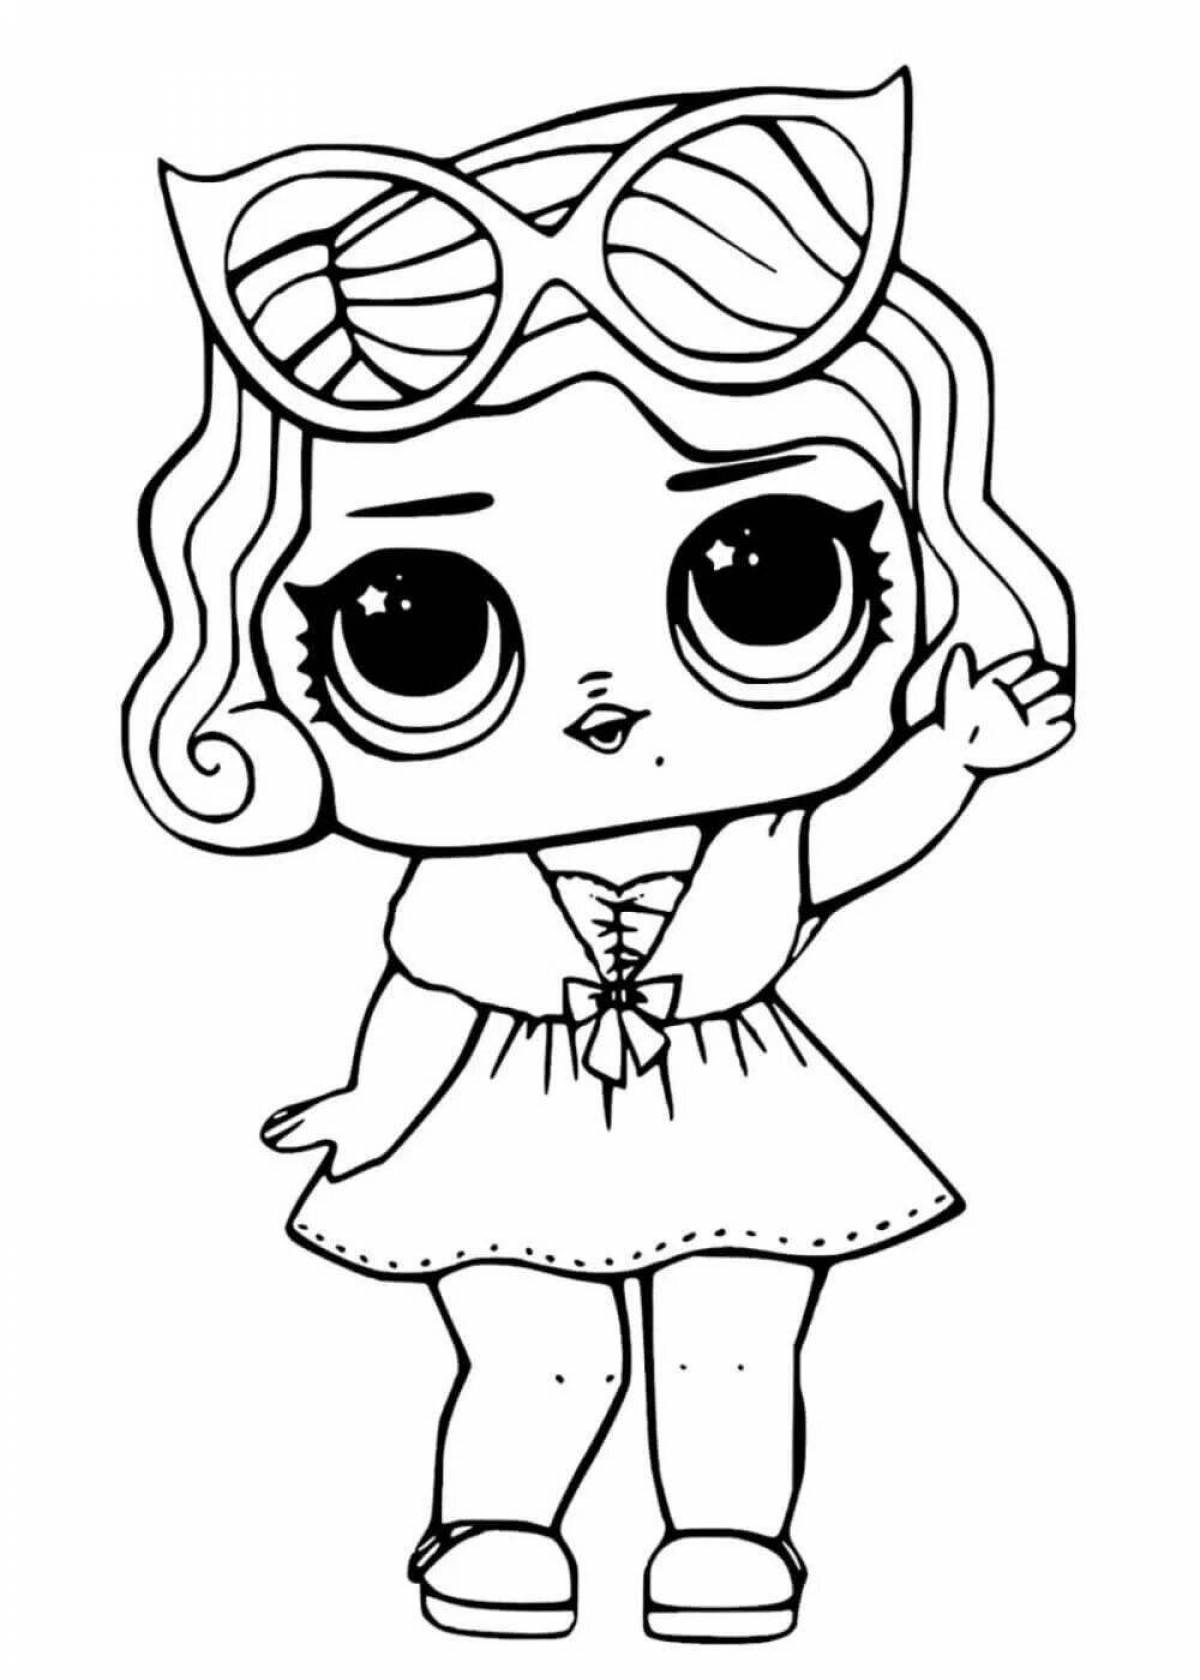 Outstanding pre-k lola doll coloring page